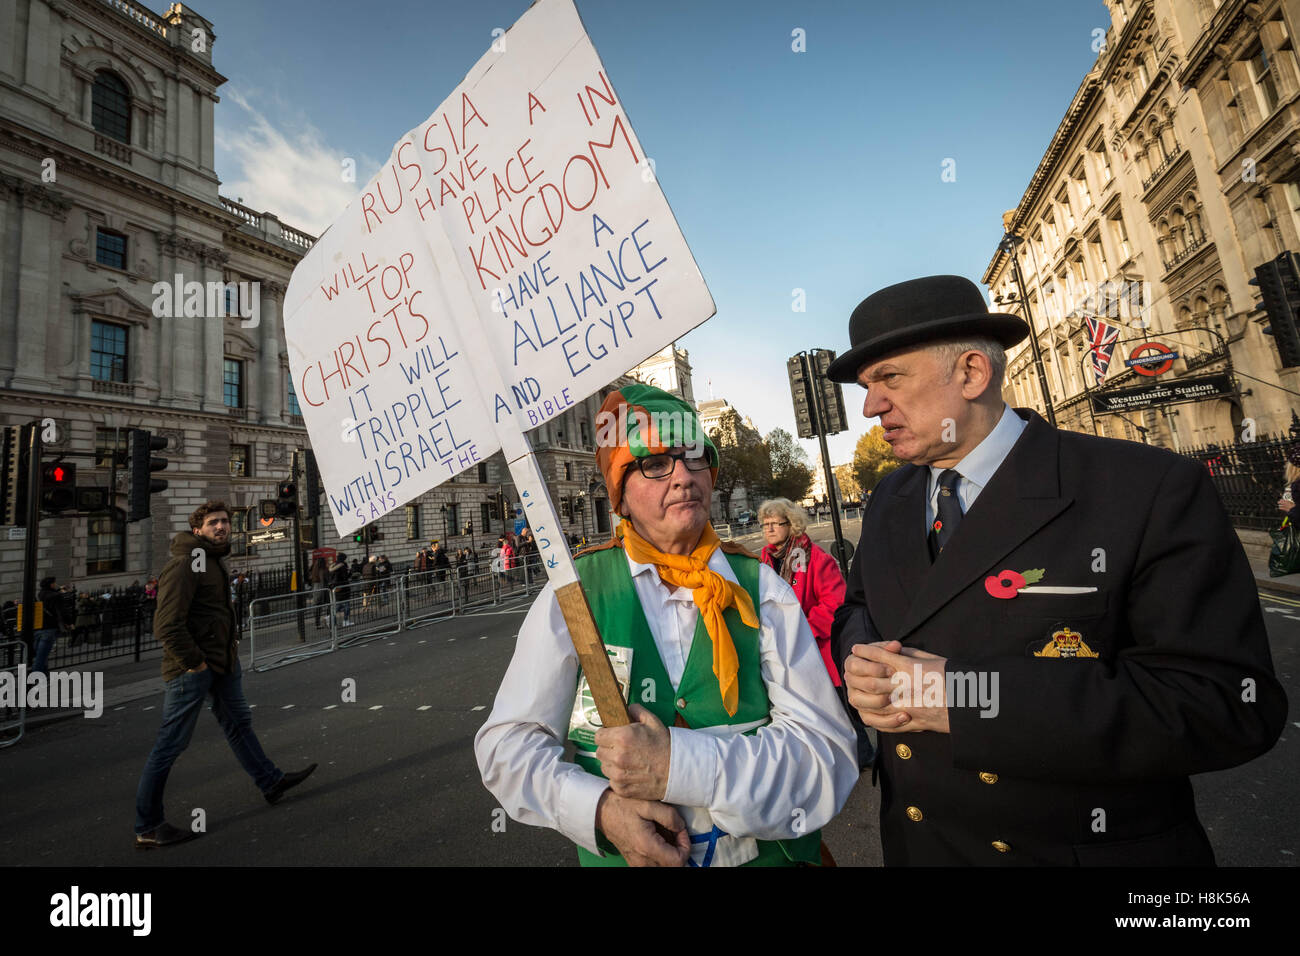 The Dancing Priest (Neil Horan) debates his religious belief that the end of the world is near on Remembrance Sunday in Whitehall, London, UK. Stock Photo